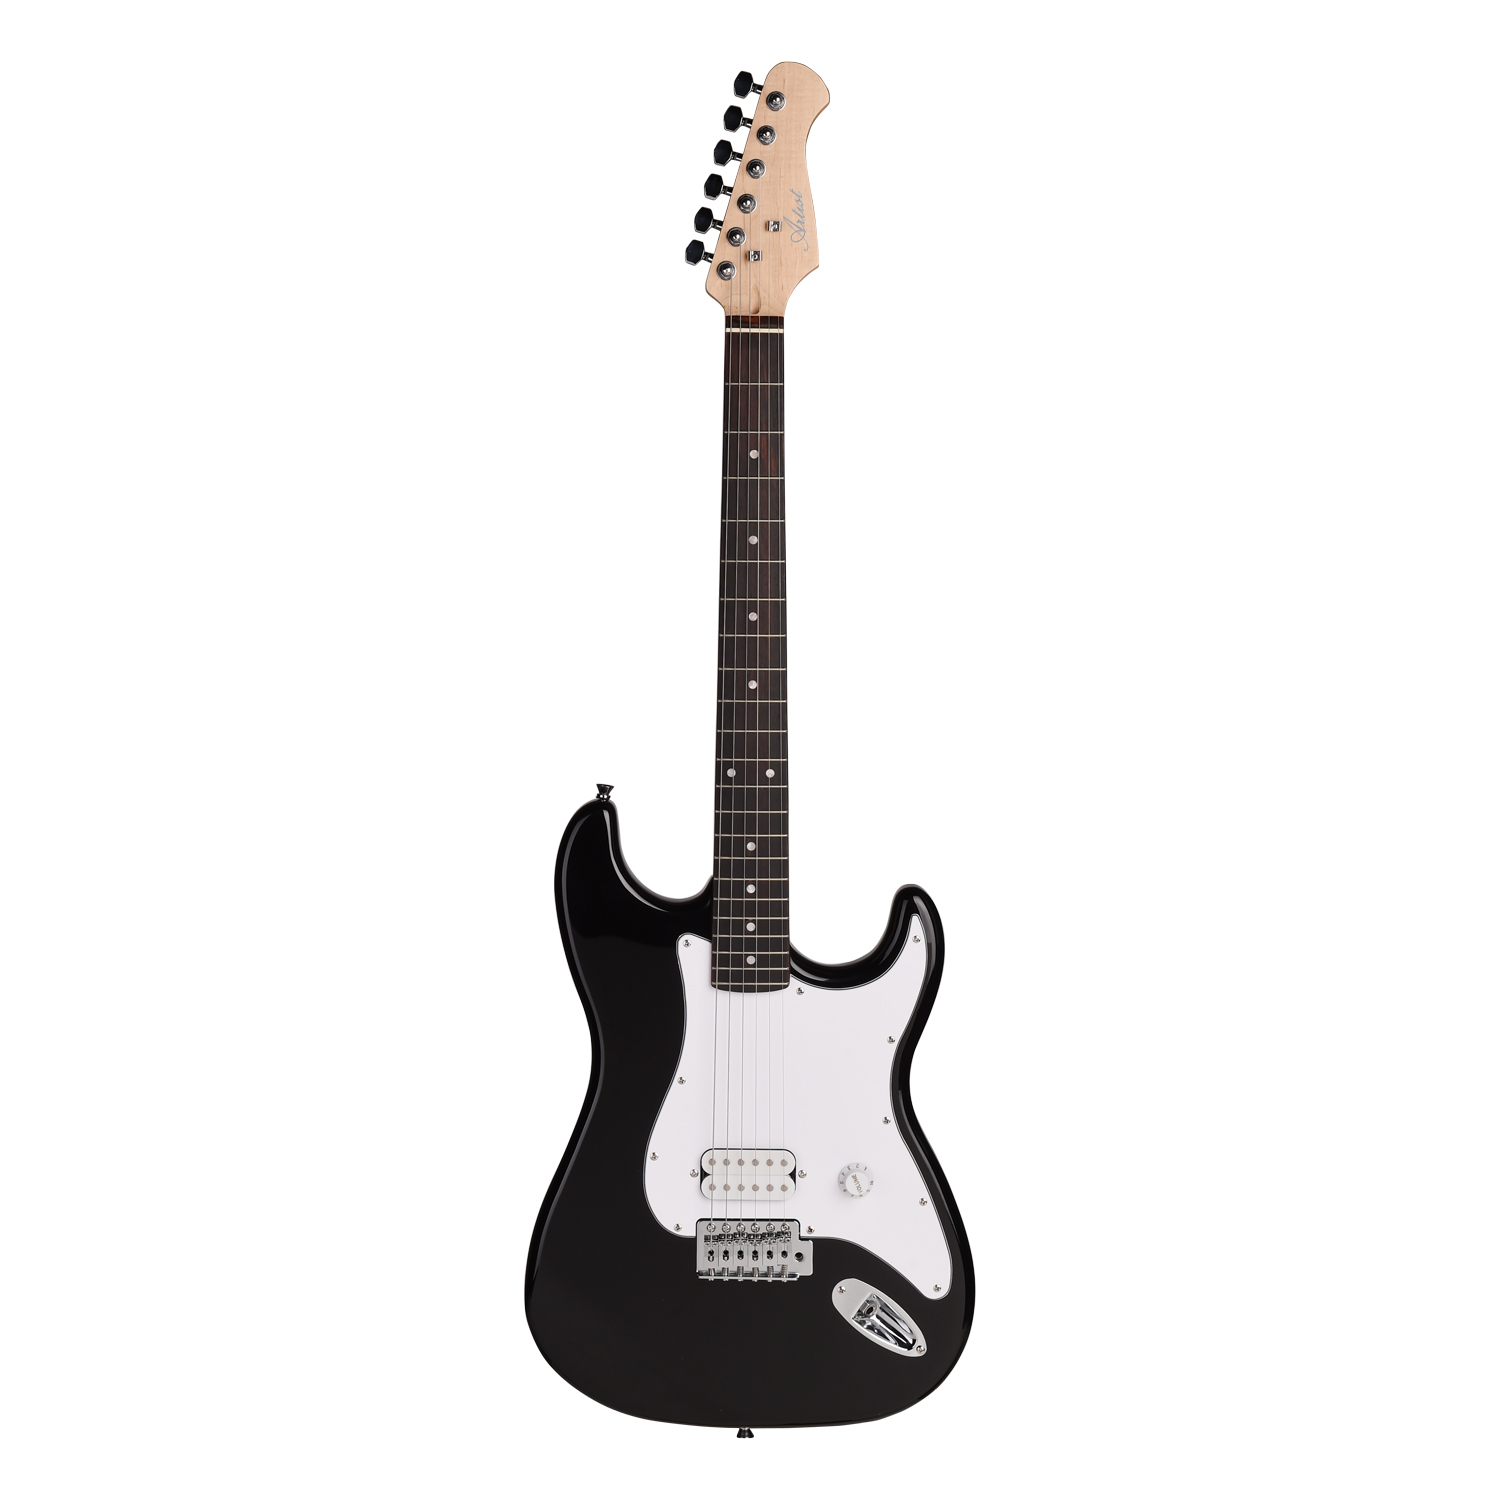 EB2 Budget Full Sized ST Style Electric Guitar - Black